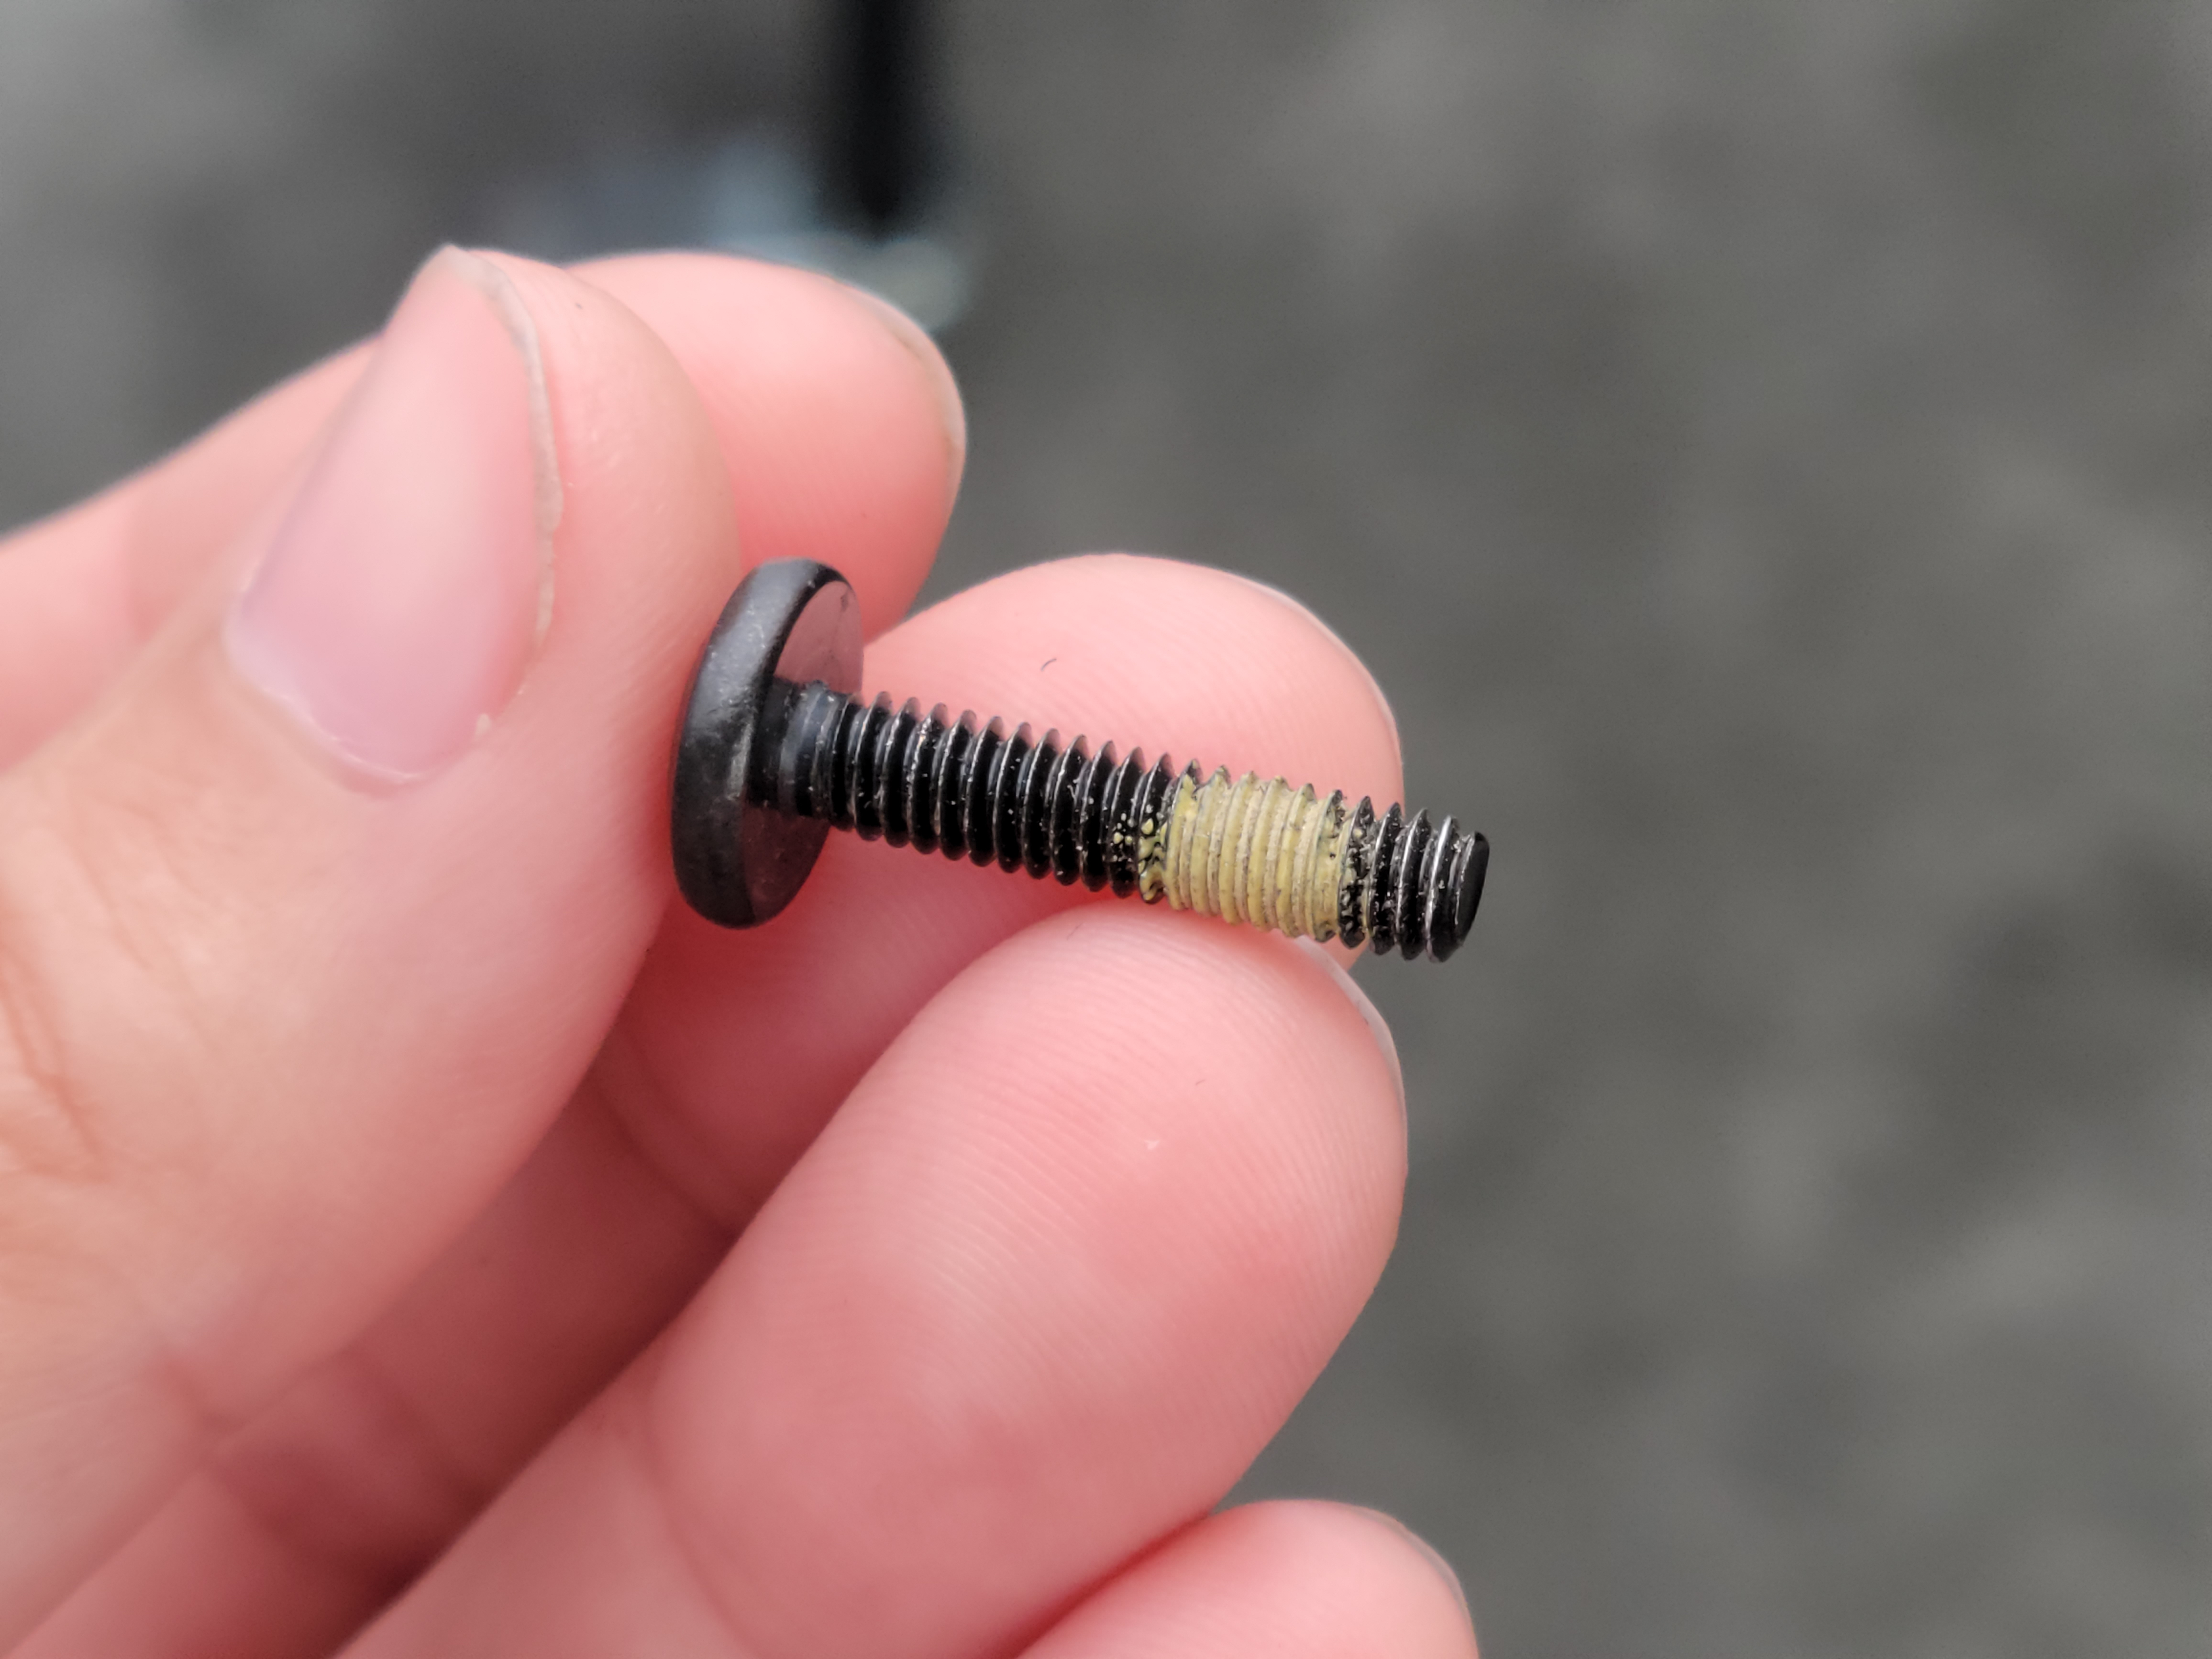 How To Remove and Install Nylok Screws